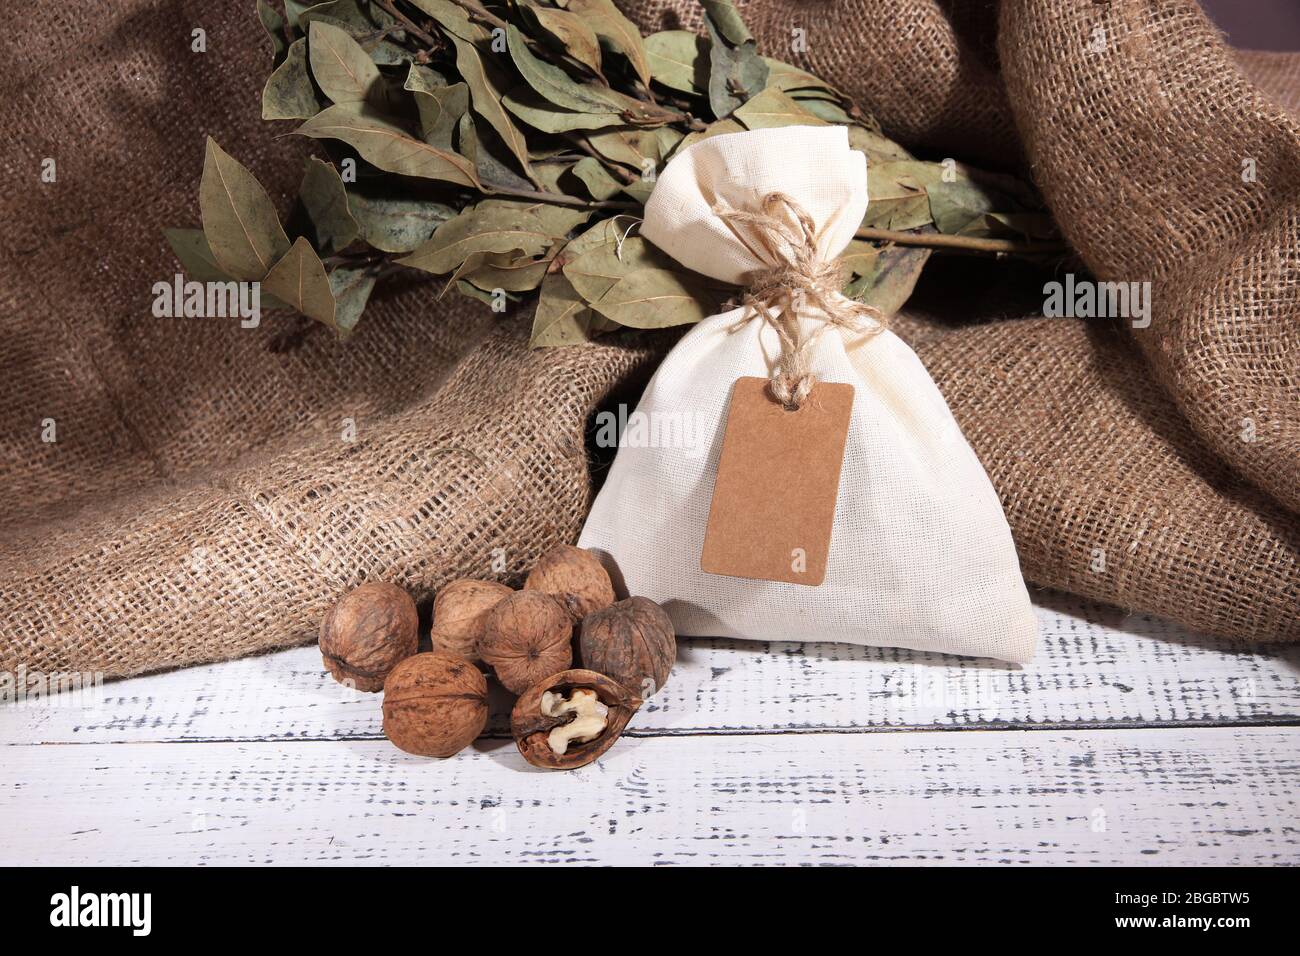 Sack full with spices, on wooden table, on sackcloth background Stock Photo